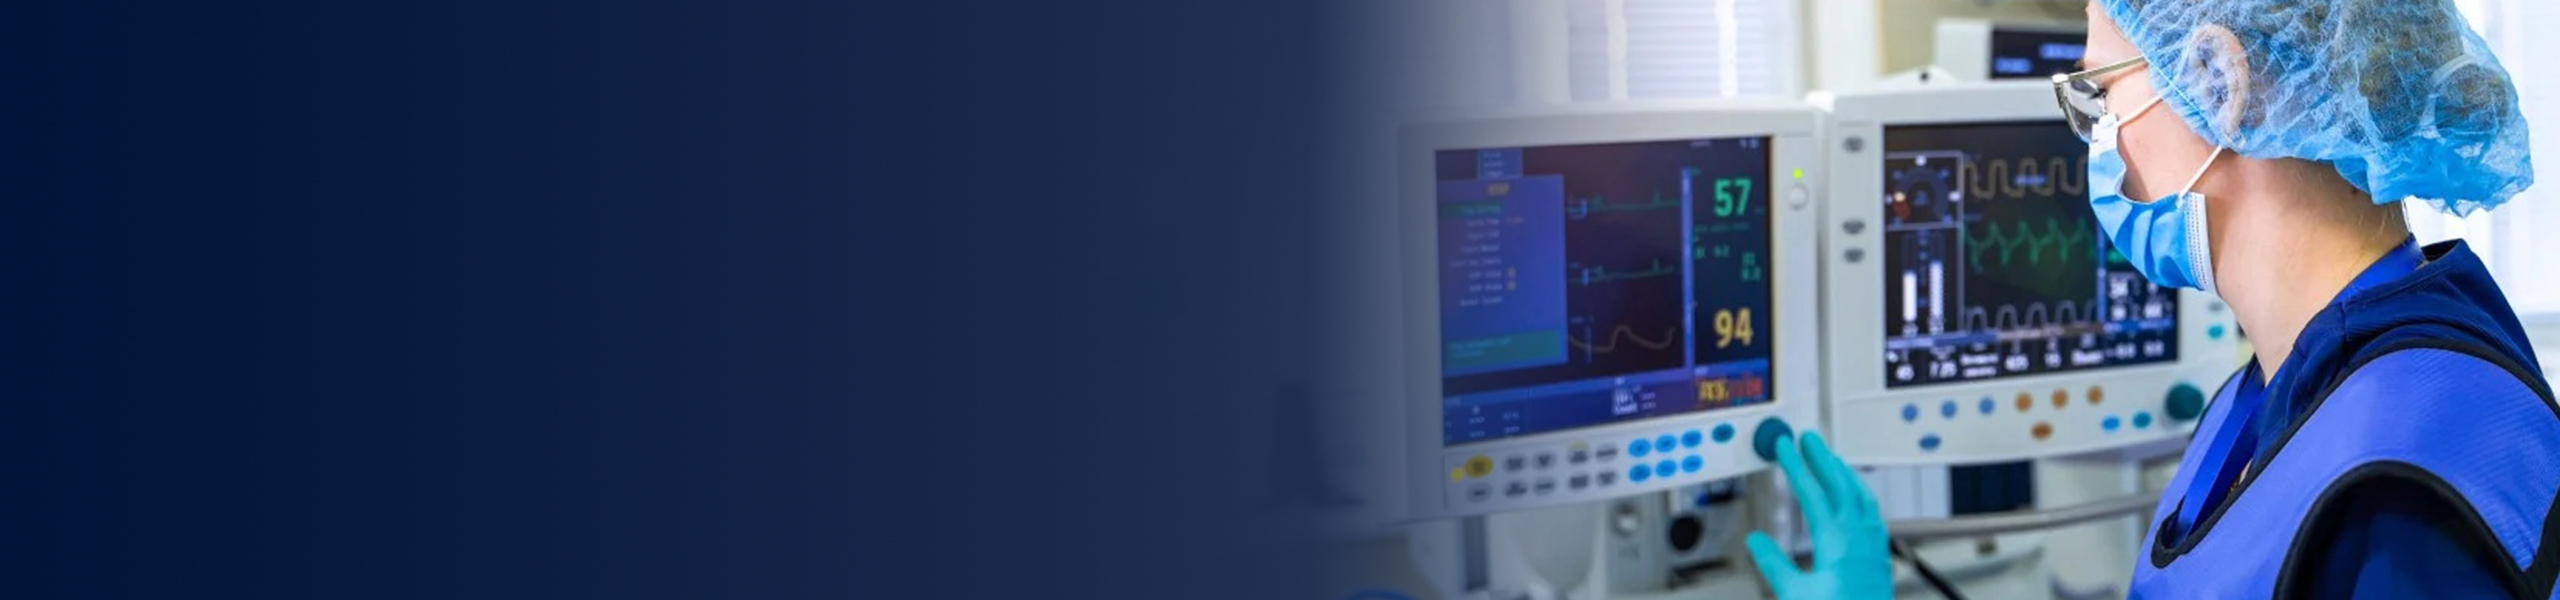 MEDICAL-GRADE DISPLAYS & MEDICAL TOUCH SCREENS